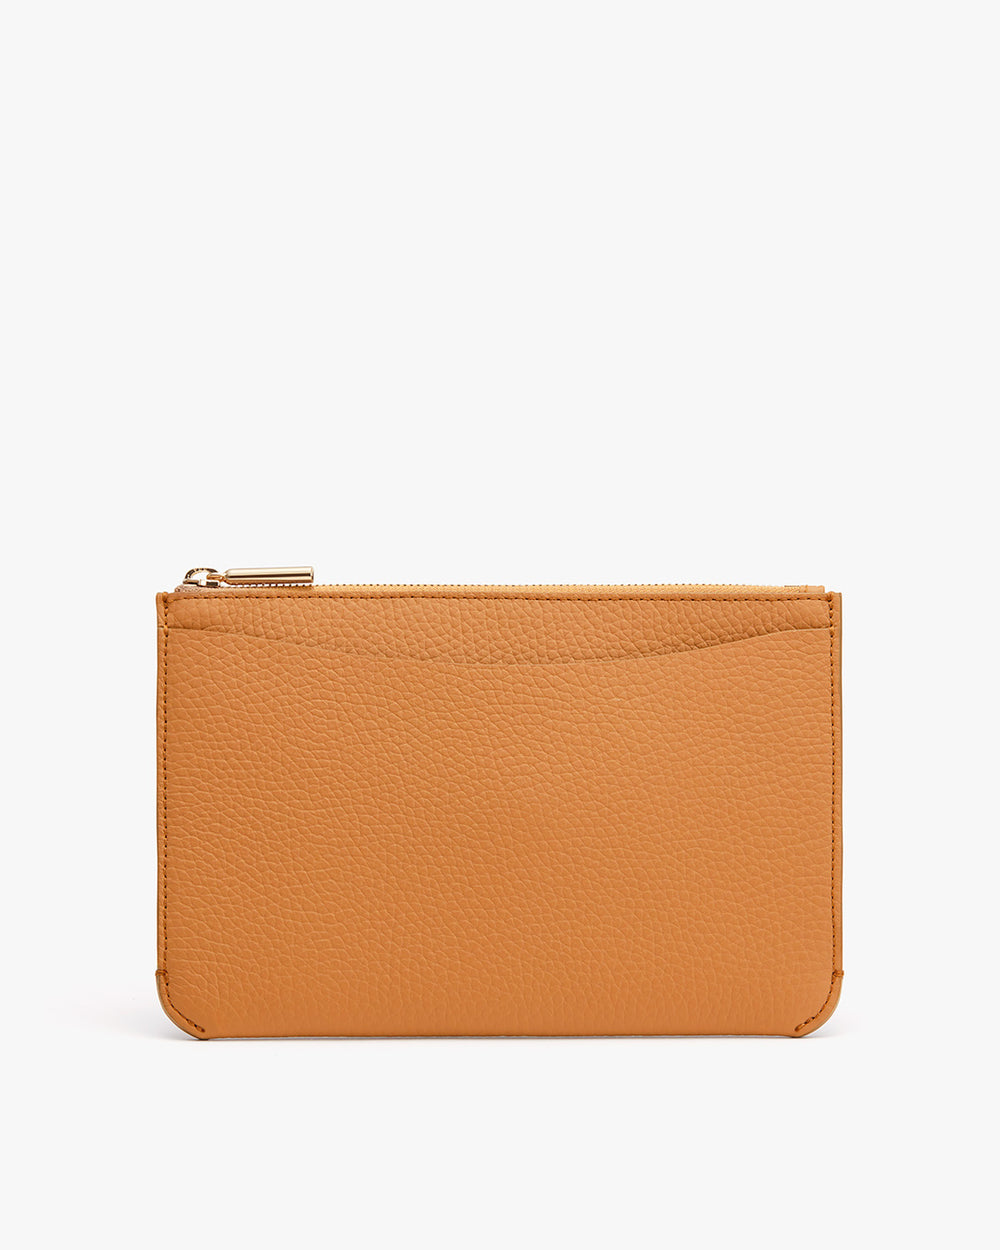 Small textured pouch with zipper on a plain background.